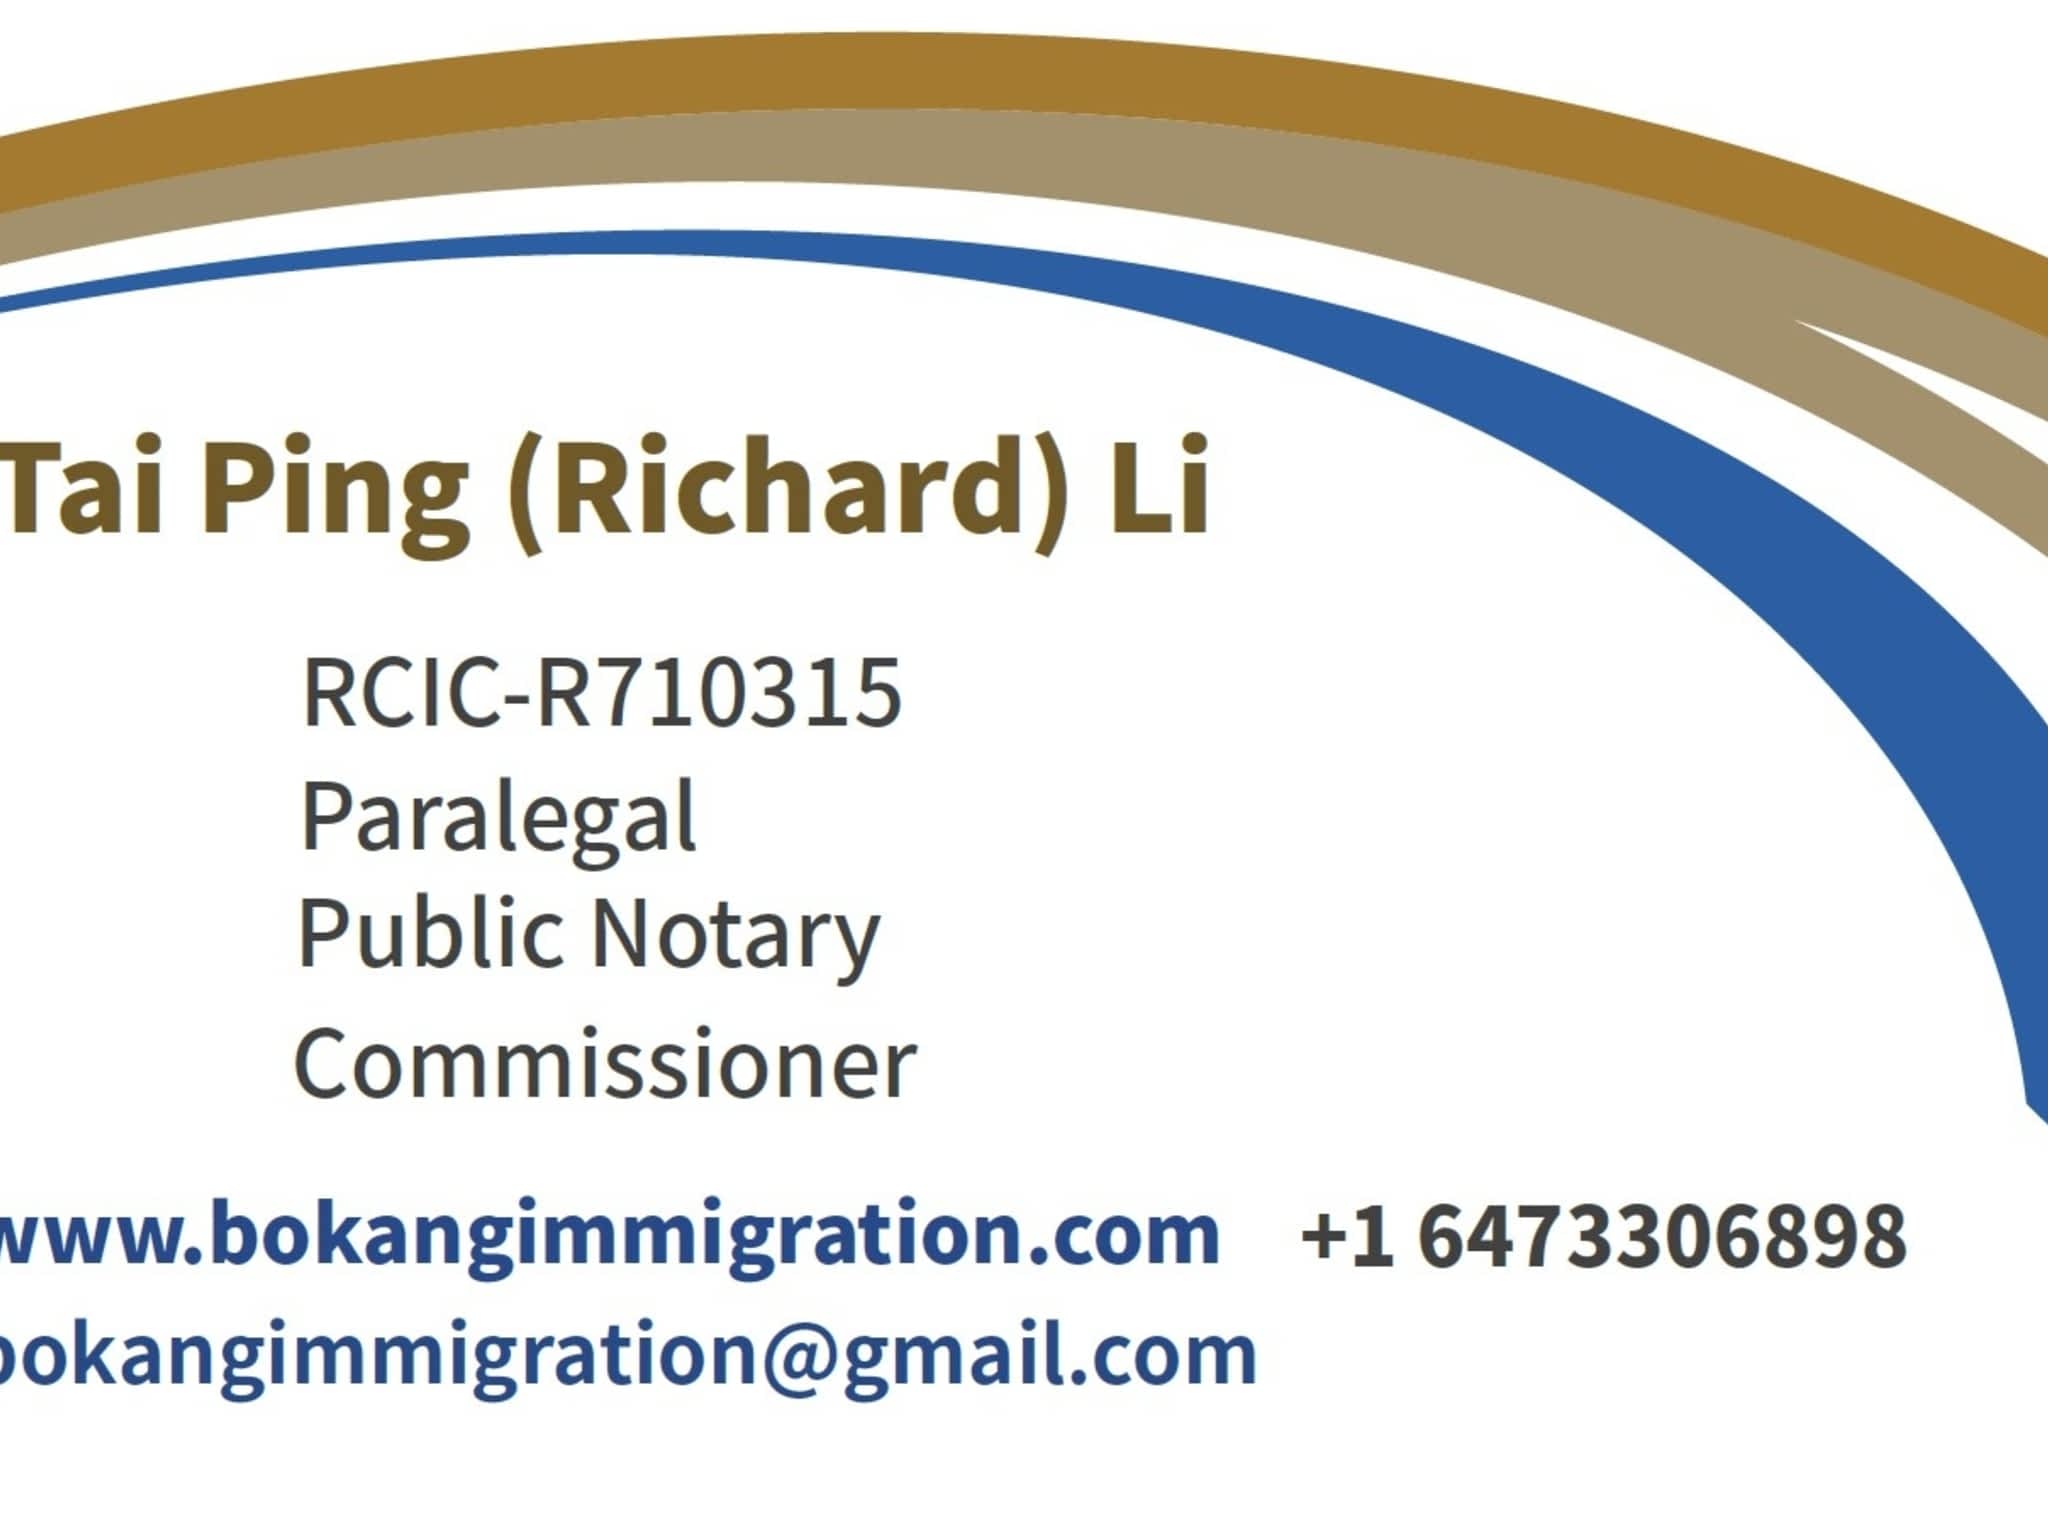 photo Bokang Immigration and Legal Services Inc.